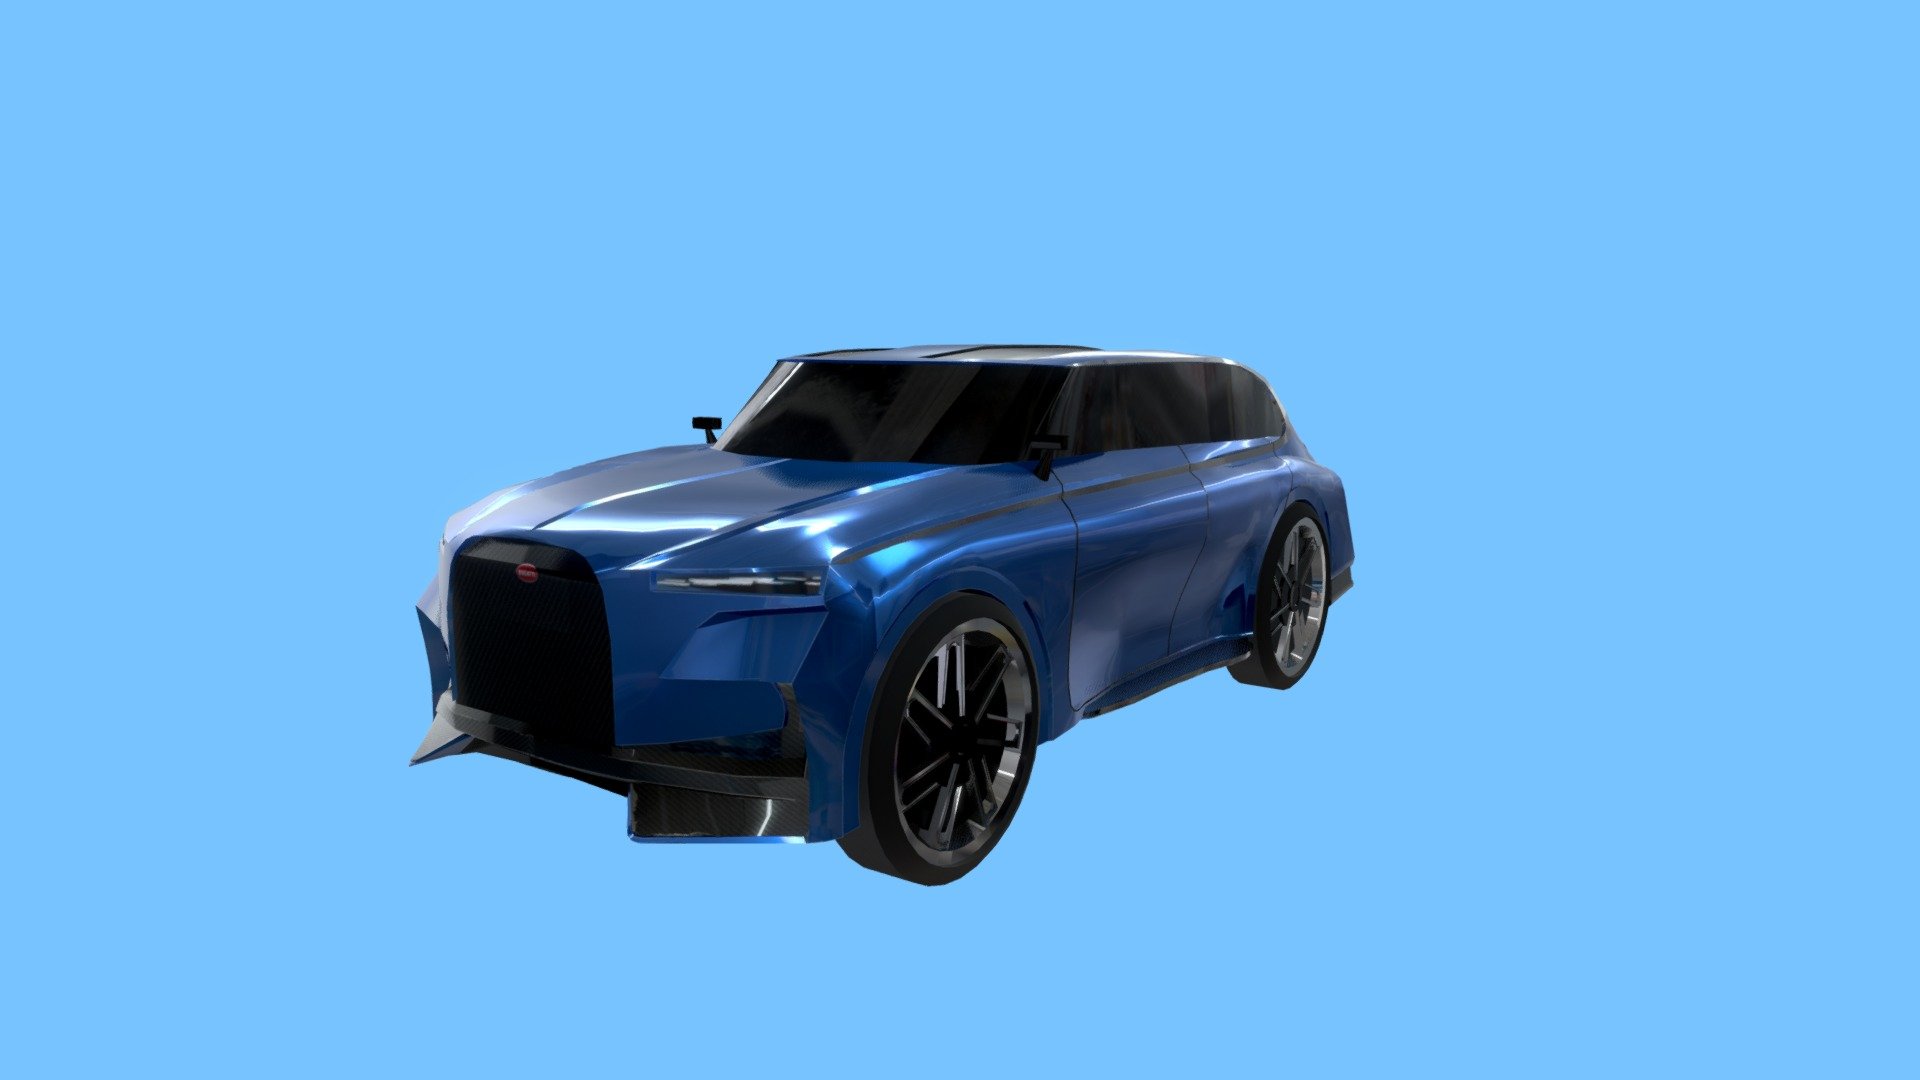 Bugatti Spartacus Hyper SUV - 3D model by Charles Smith Blitz Mobile Apps  BlitzMobileApp 7d8c095